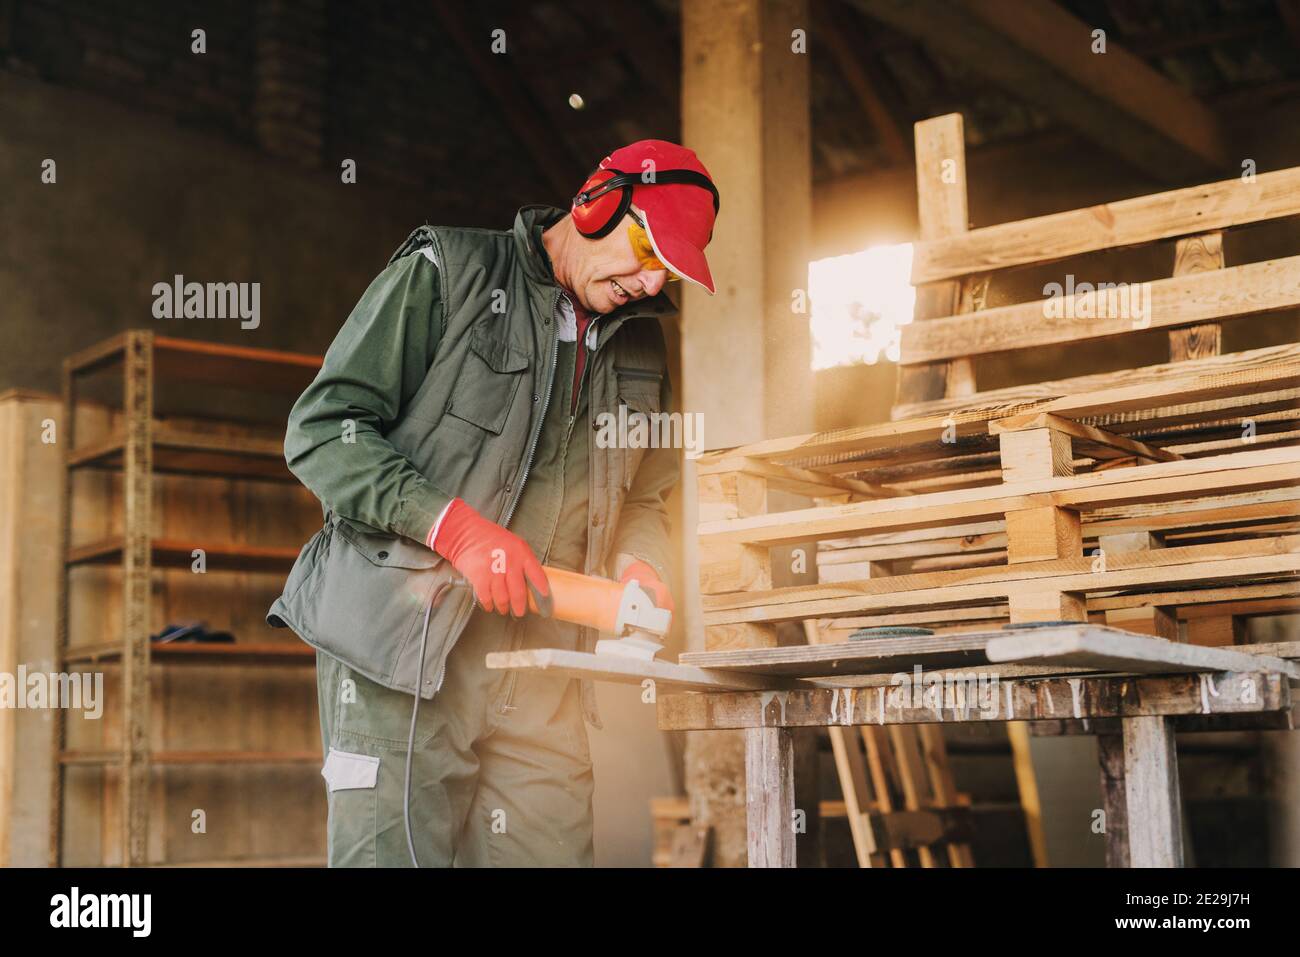 Skilled Manpower High Resolution Stock Photography And Images Alamy